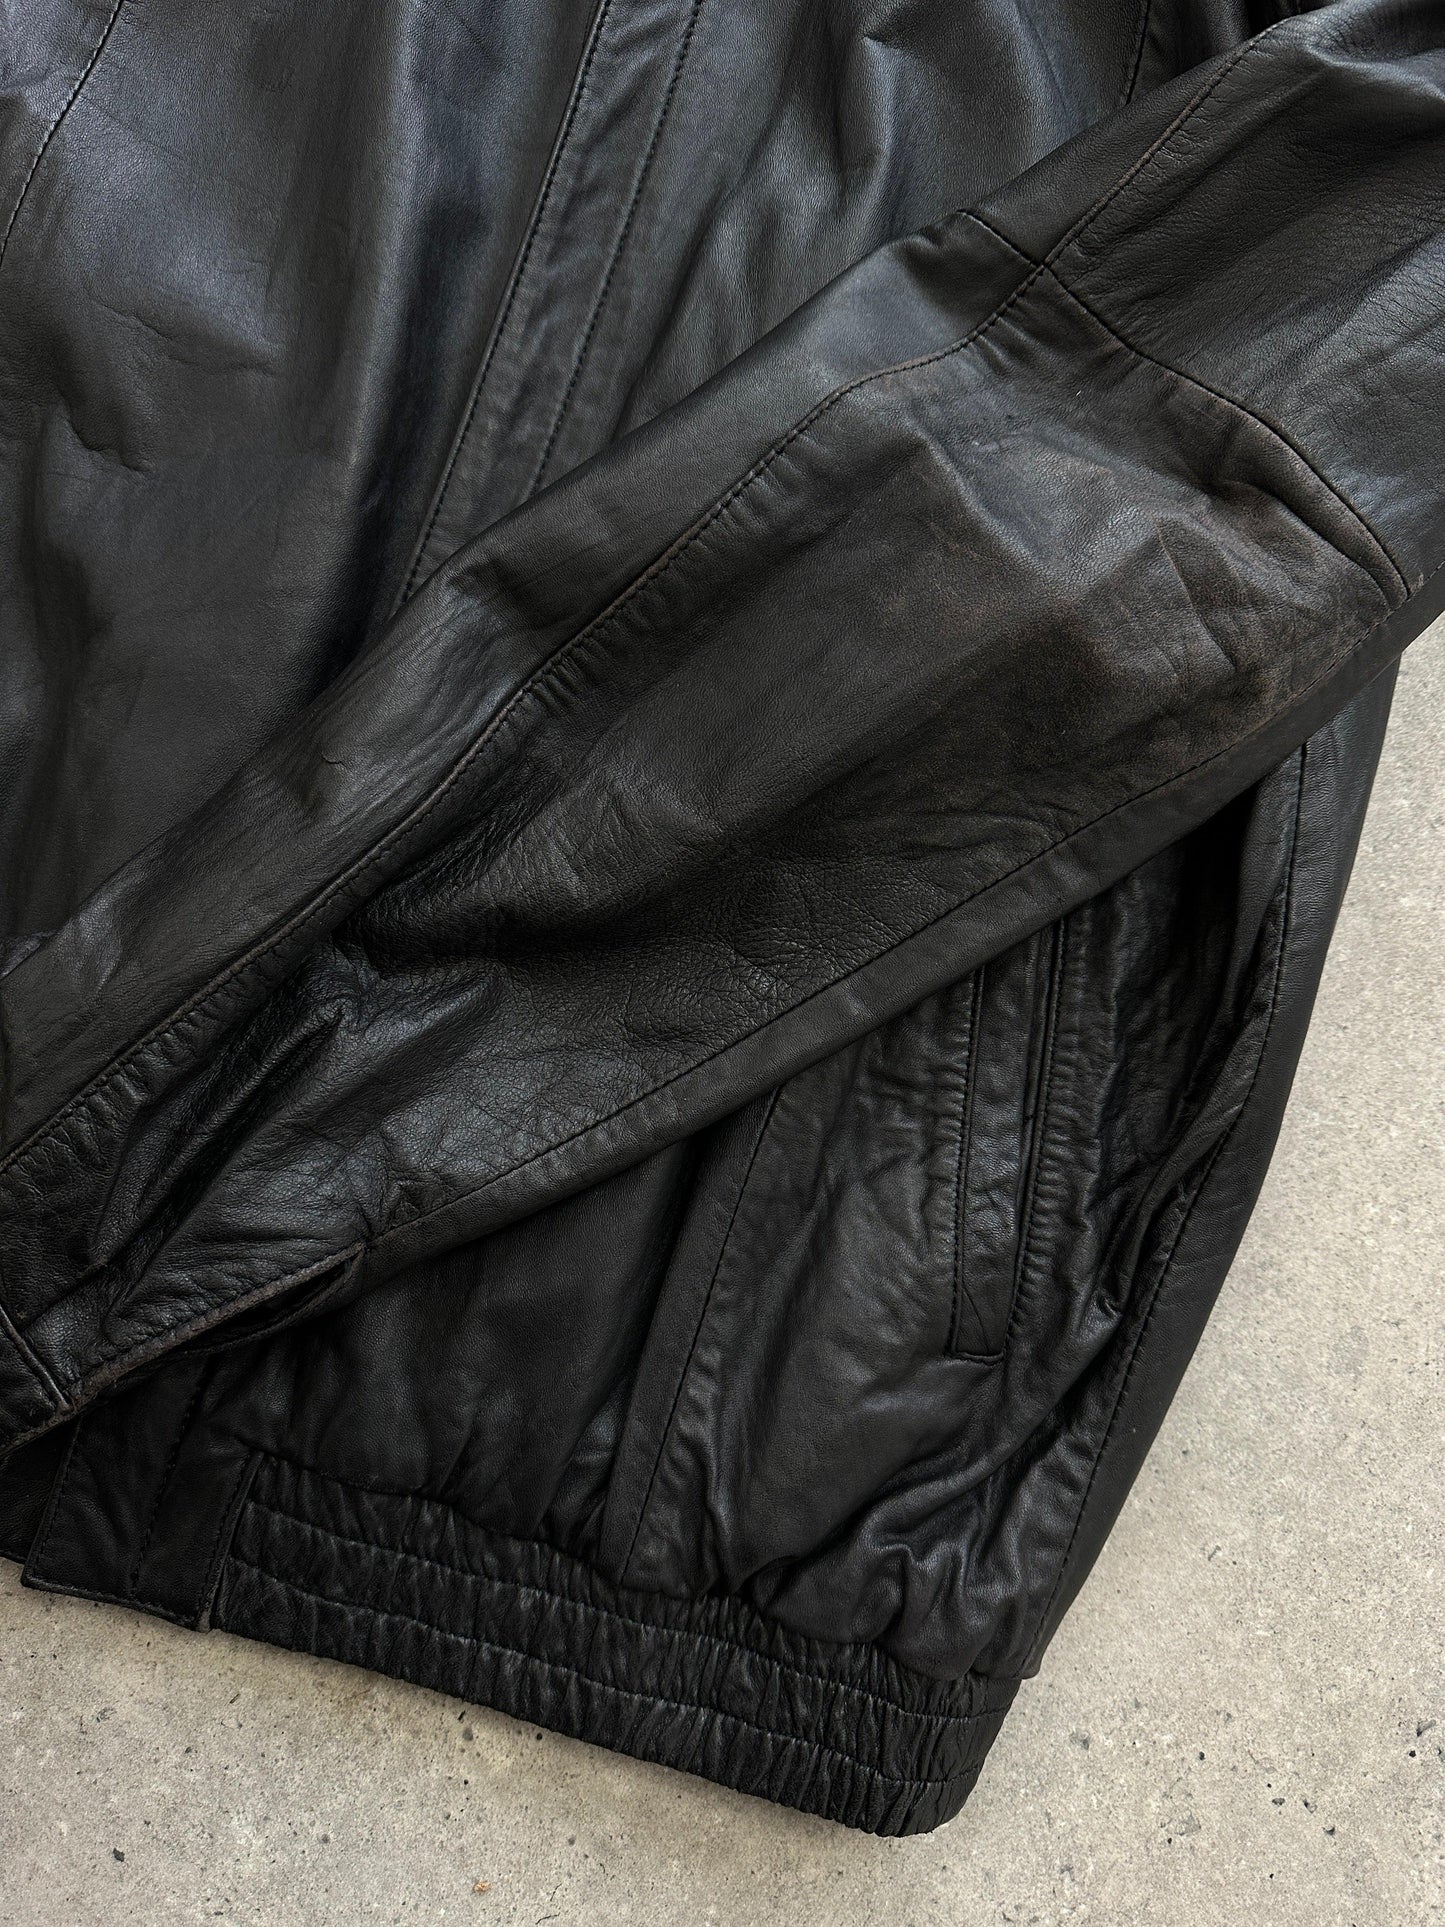 Italian Vintage Leather Bomber Jacket - M - Known Source